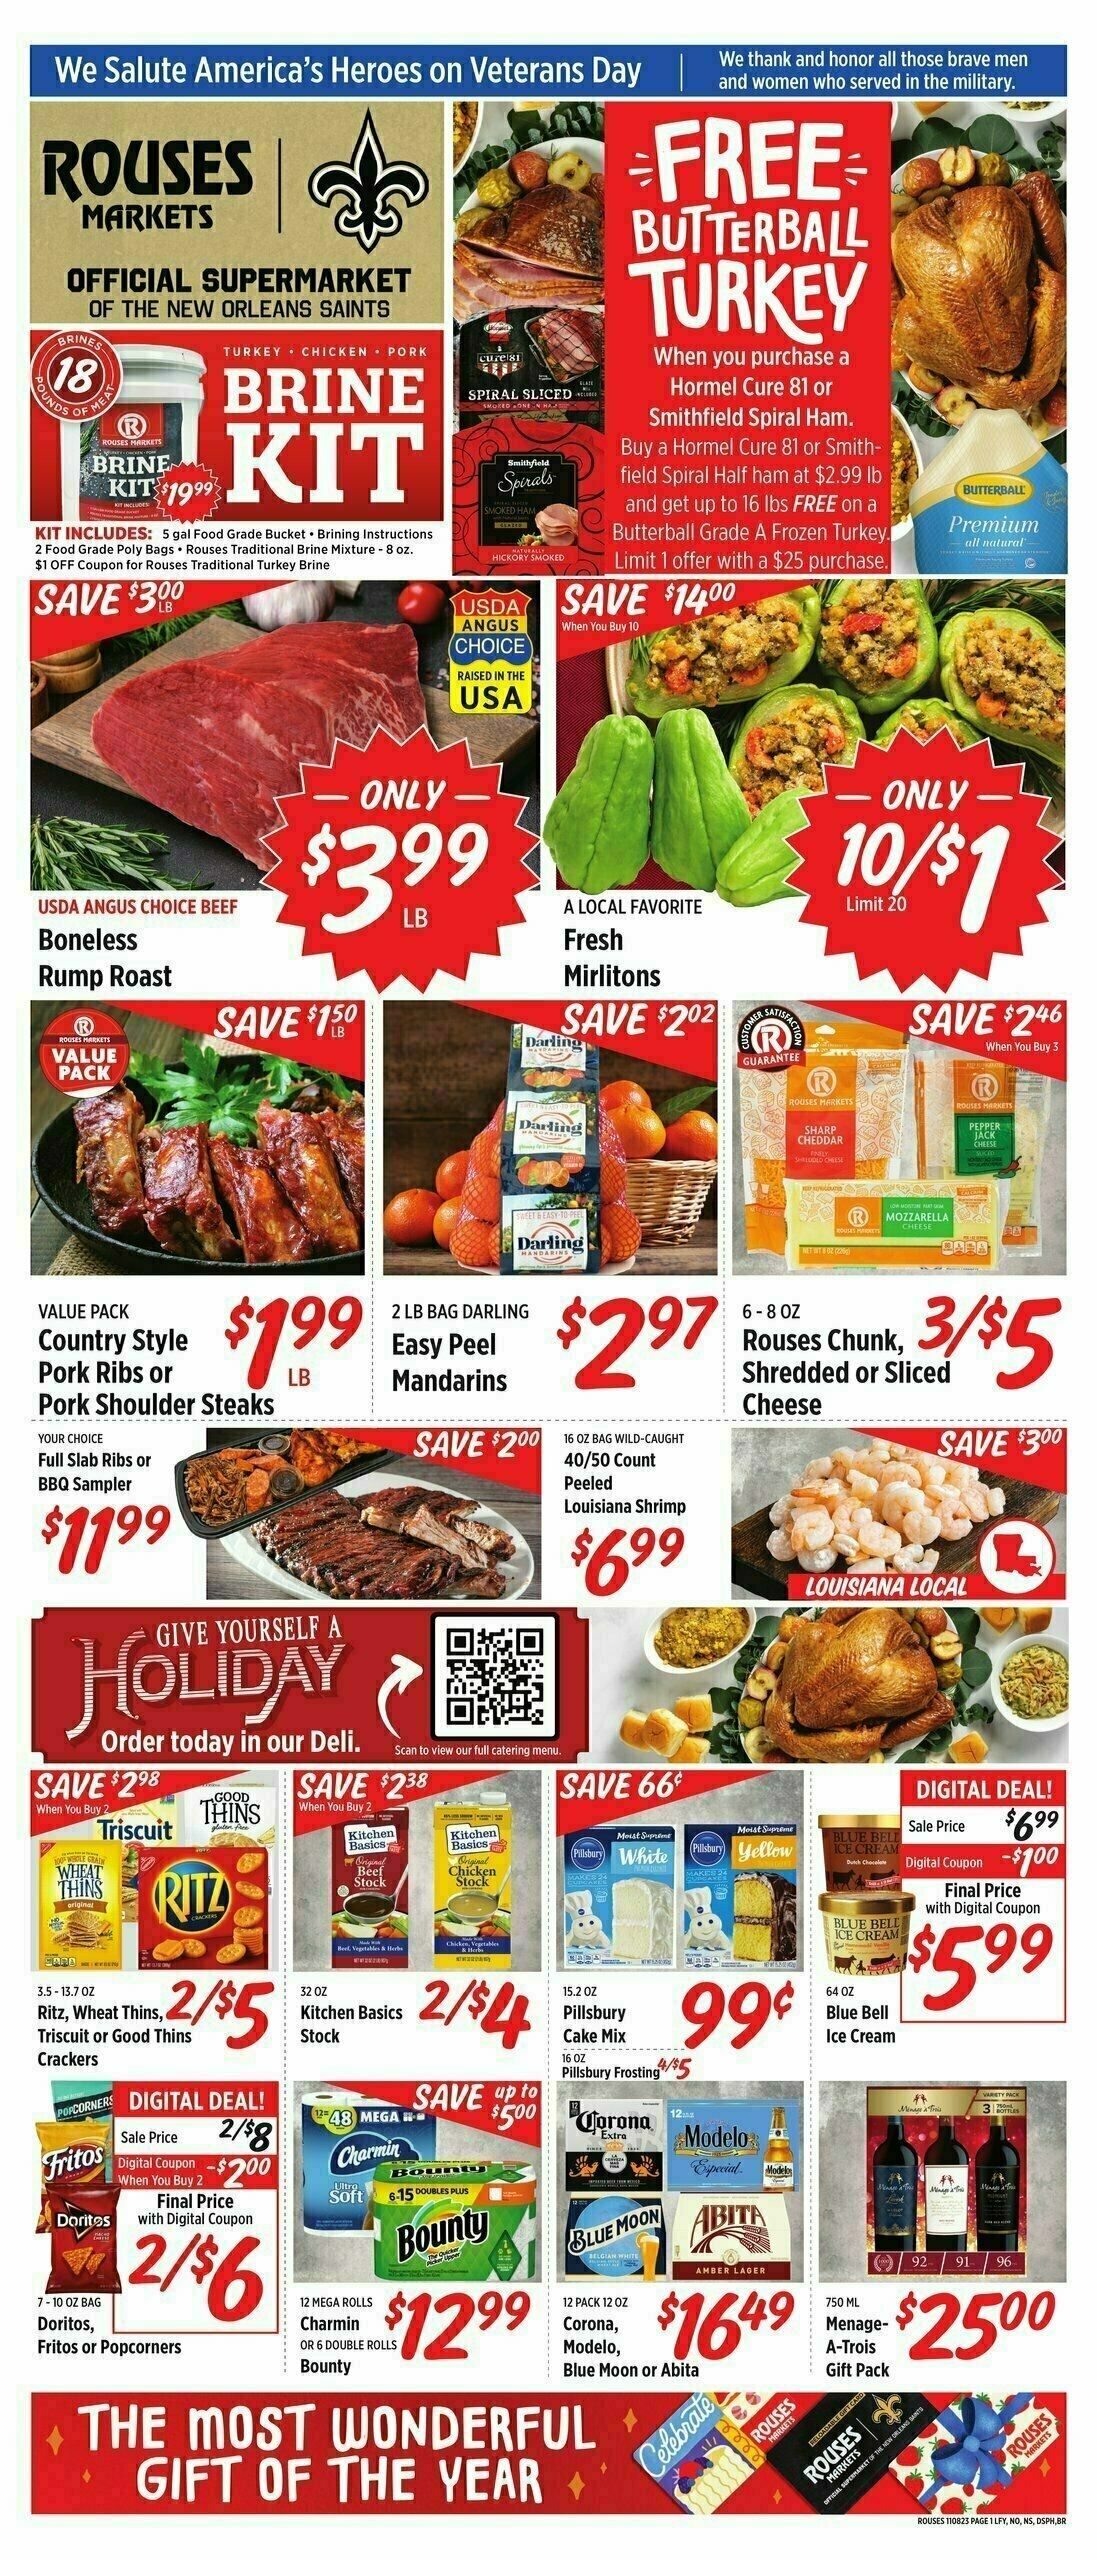 Rouses Markets Weekly Ad from November 8